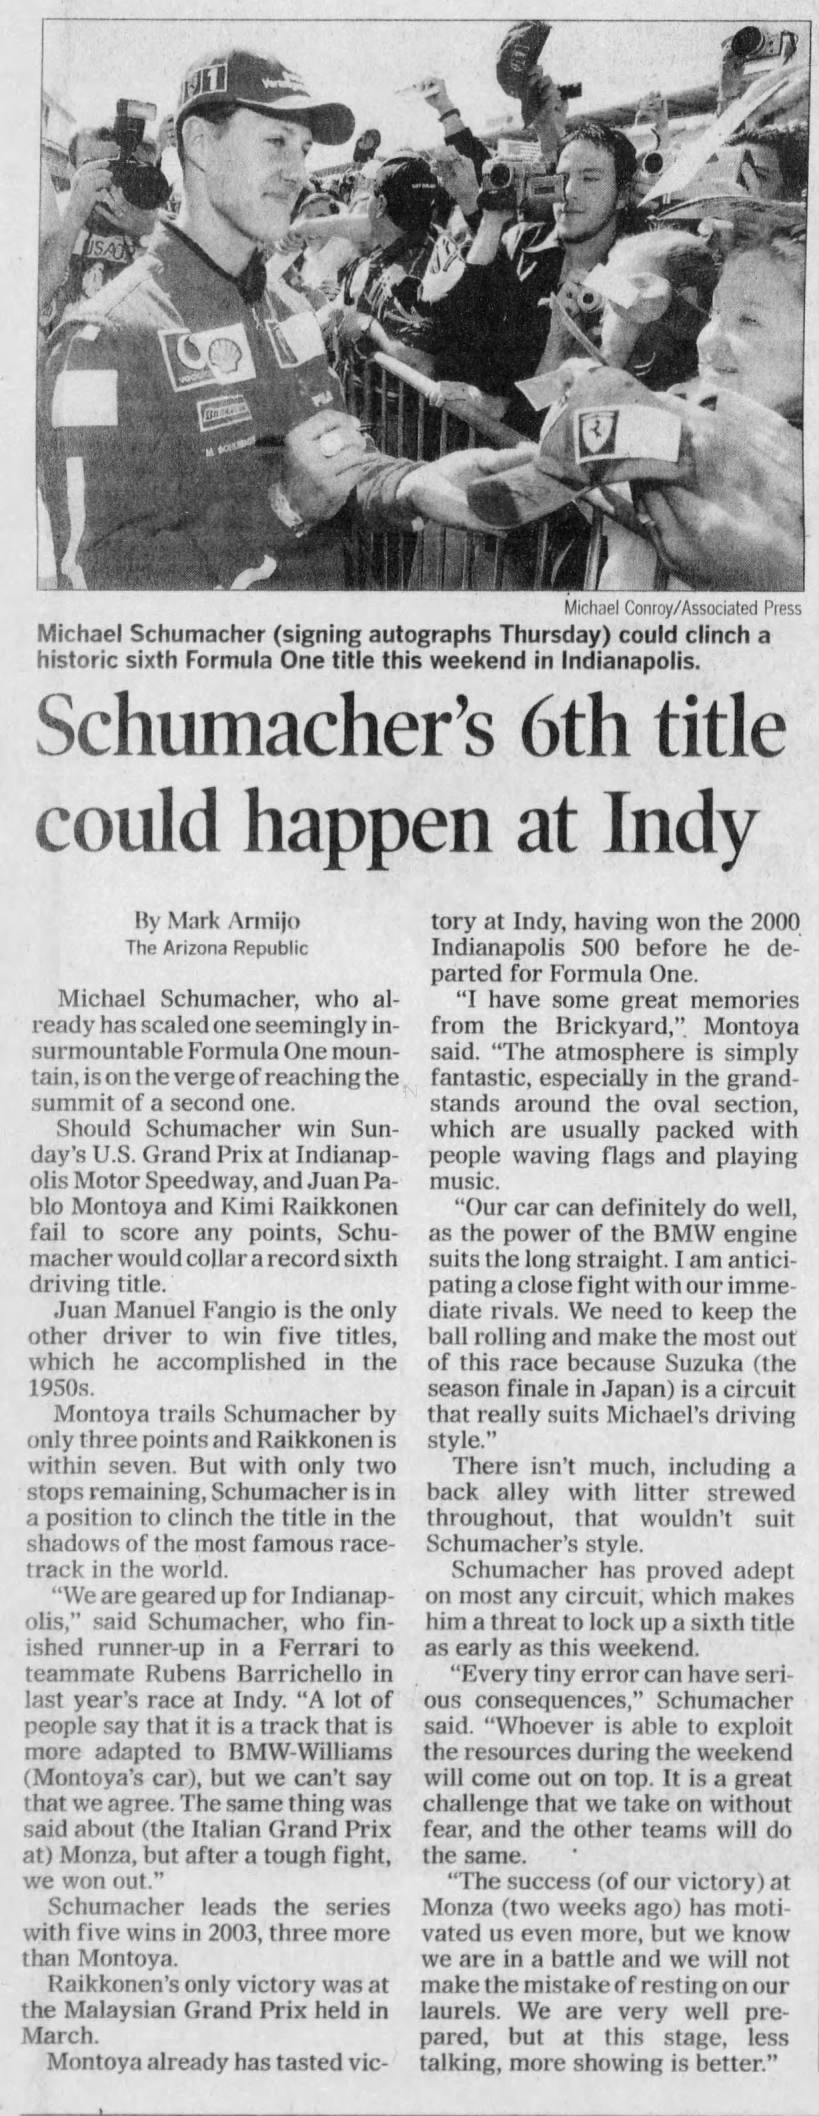 Schumacher's 6th title could happen at Indy - Arizona Republic - 26 September 2003 - Page C16